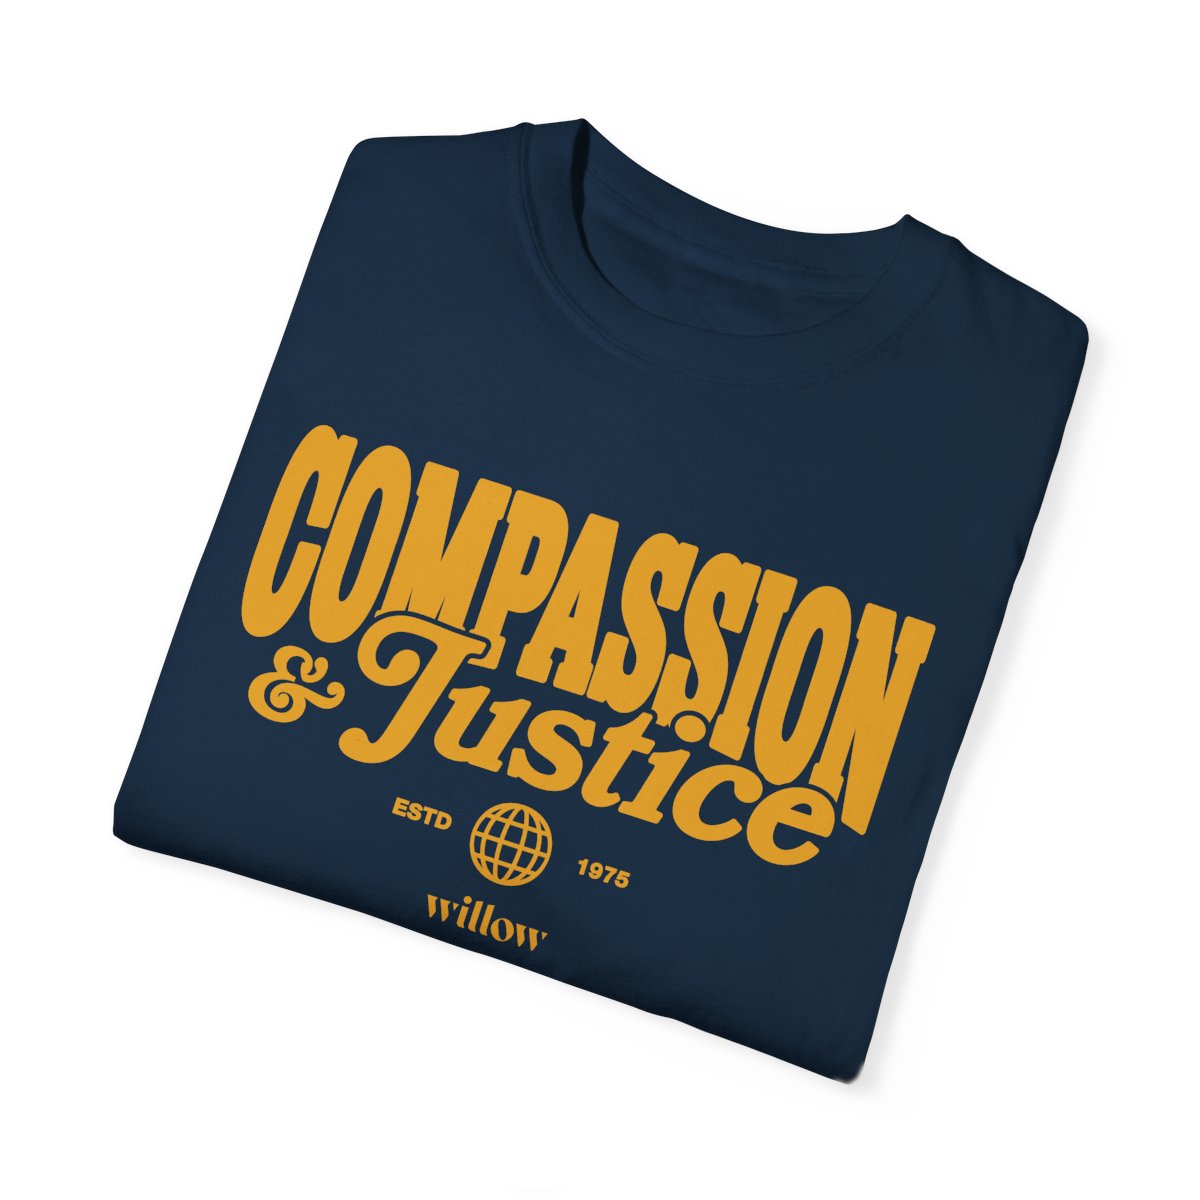 Compassion & Justice T-Shirt product thumbnail image